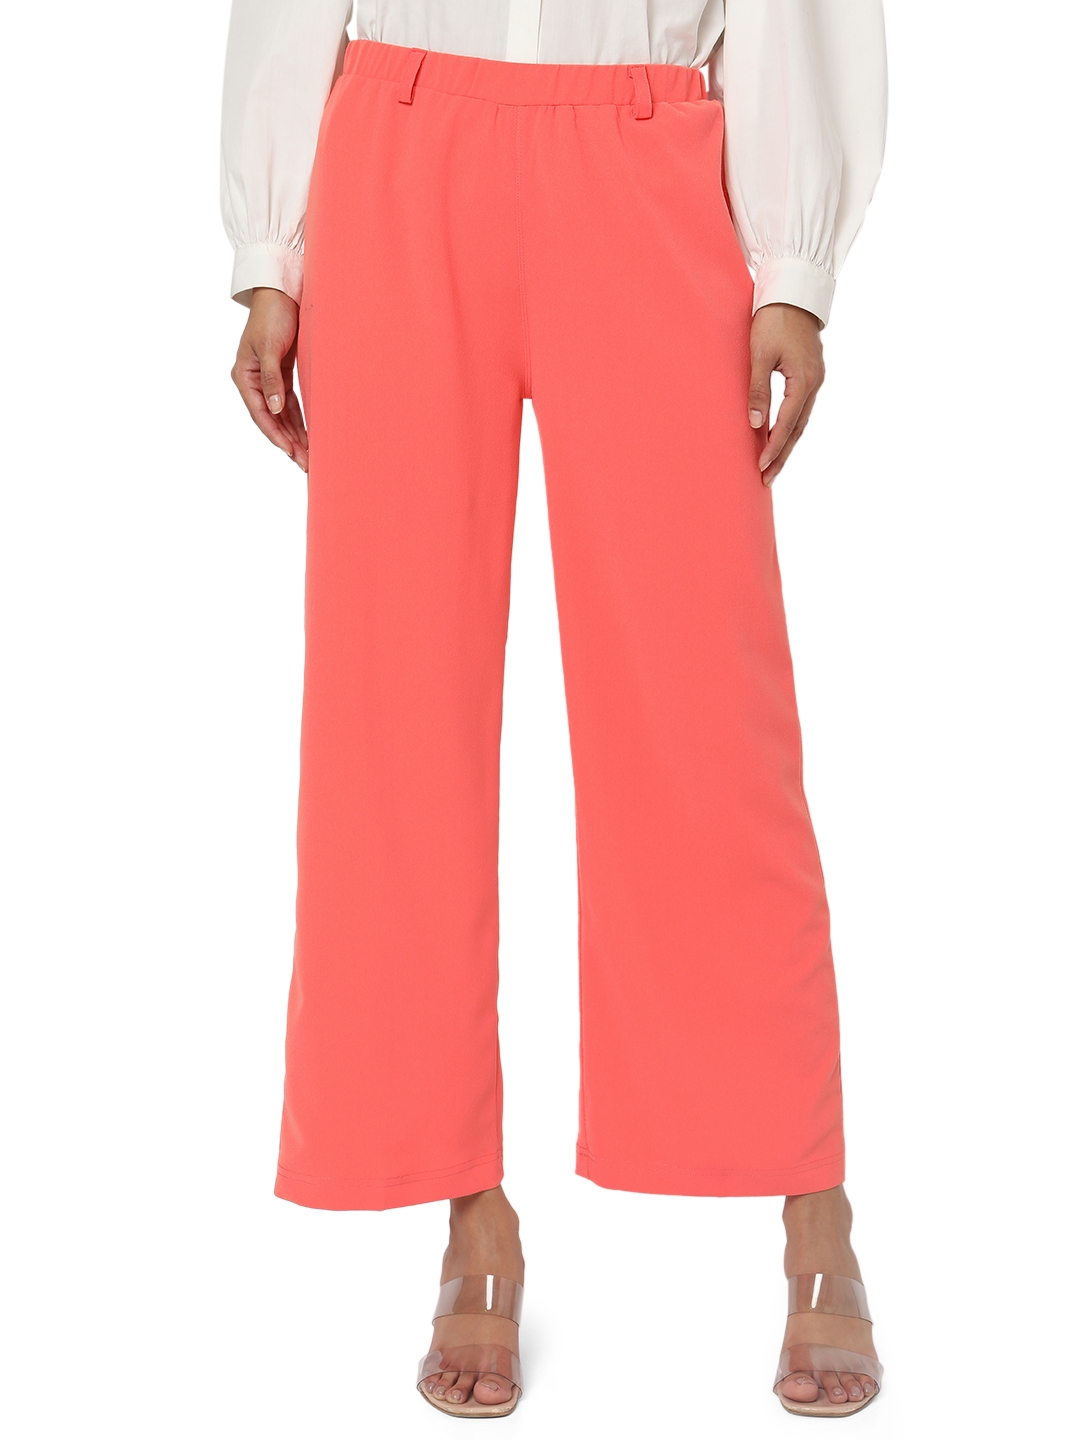 Smarty Pants | Smarty Pants women's moss cotton lycra pink color flared formal trouser